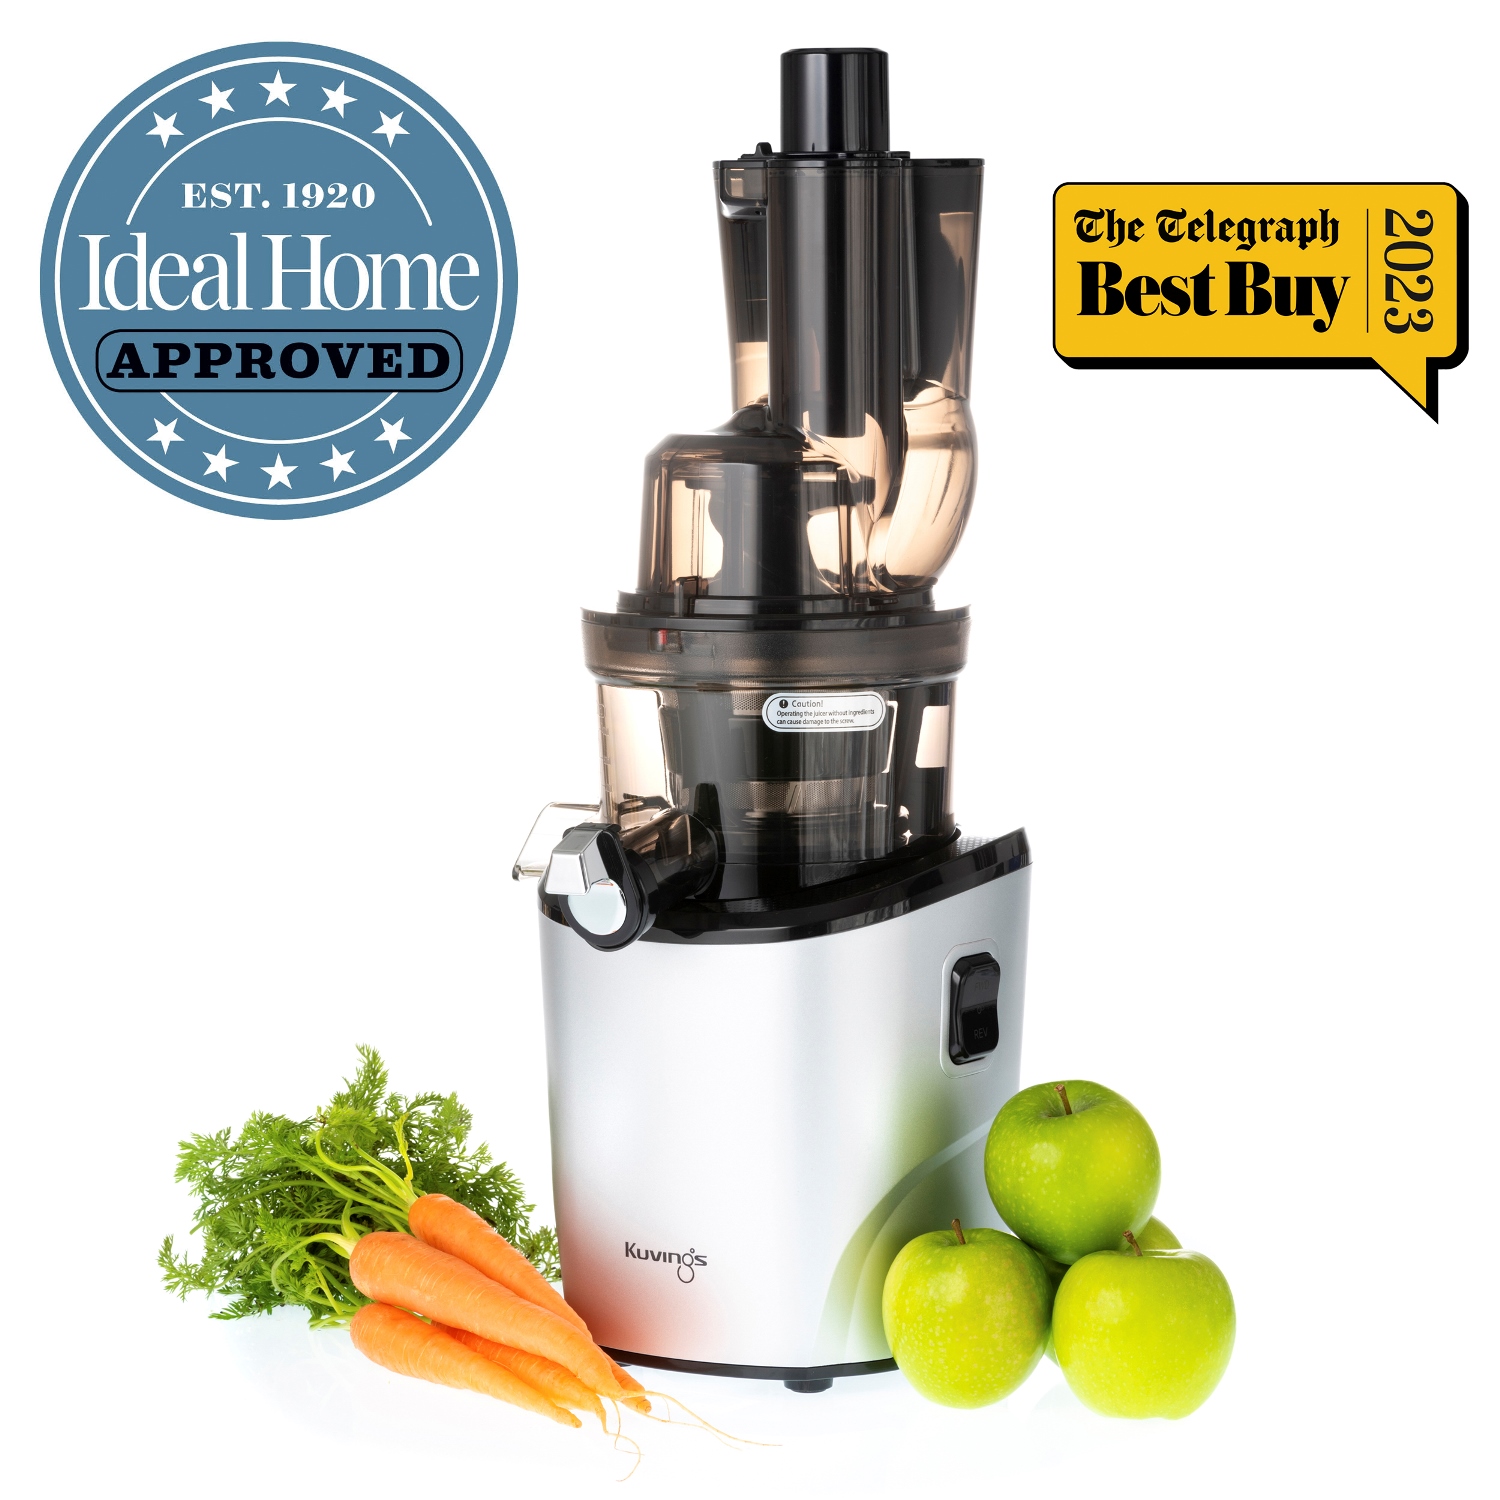 Kuvings REVO830 Silver Cold Press Juicer with Awards